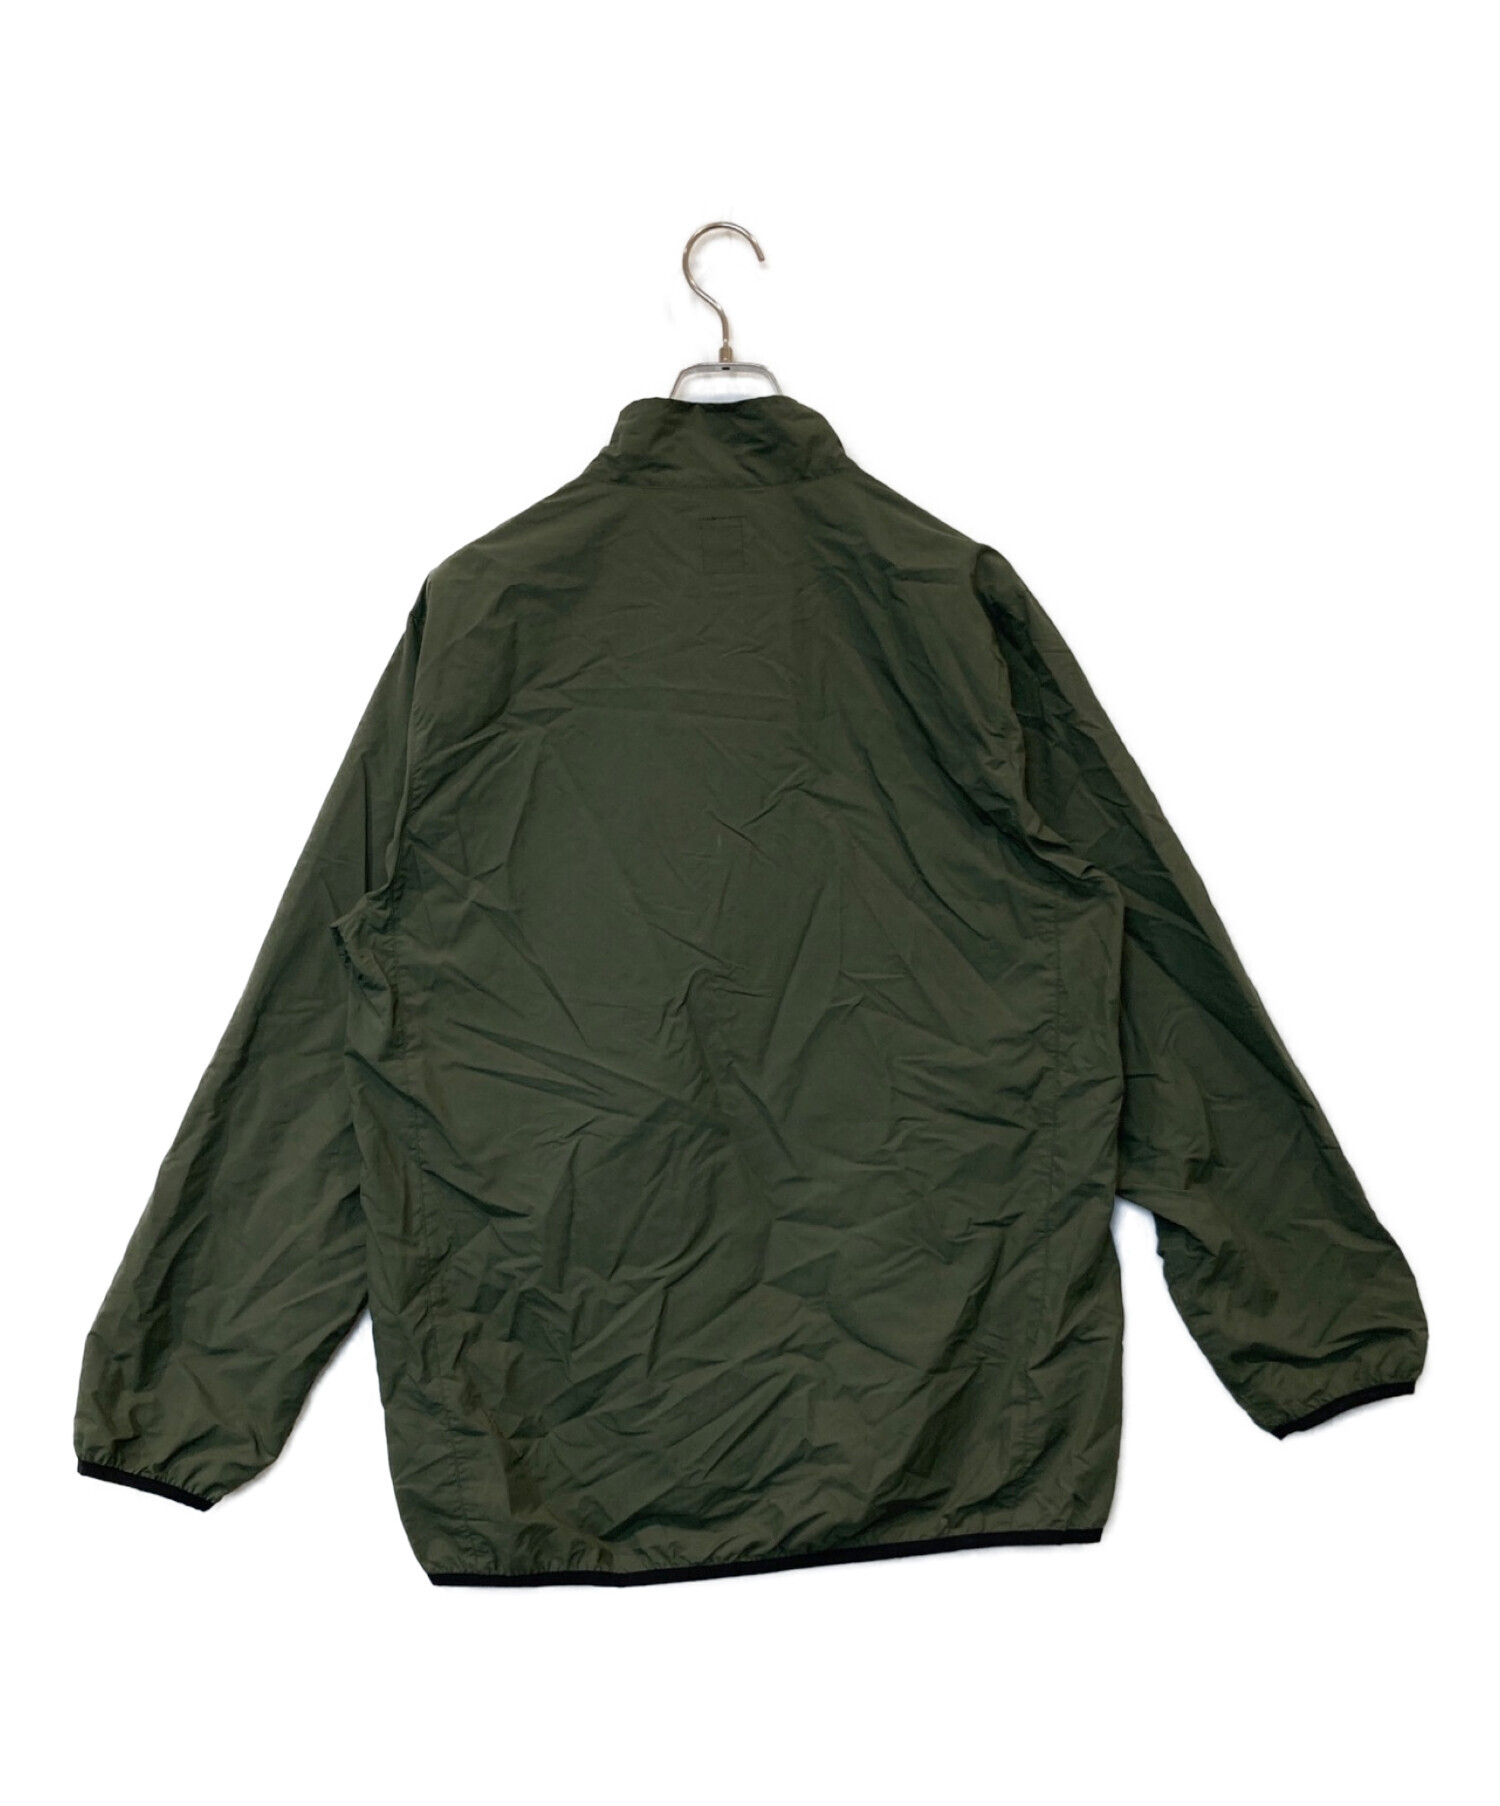 South2 West8 (サウスツー ウエストエイト) PACKABLE JACKET カーキ サイズ:M